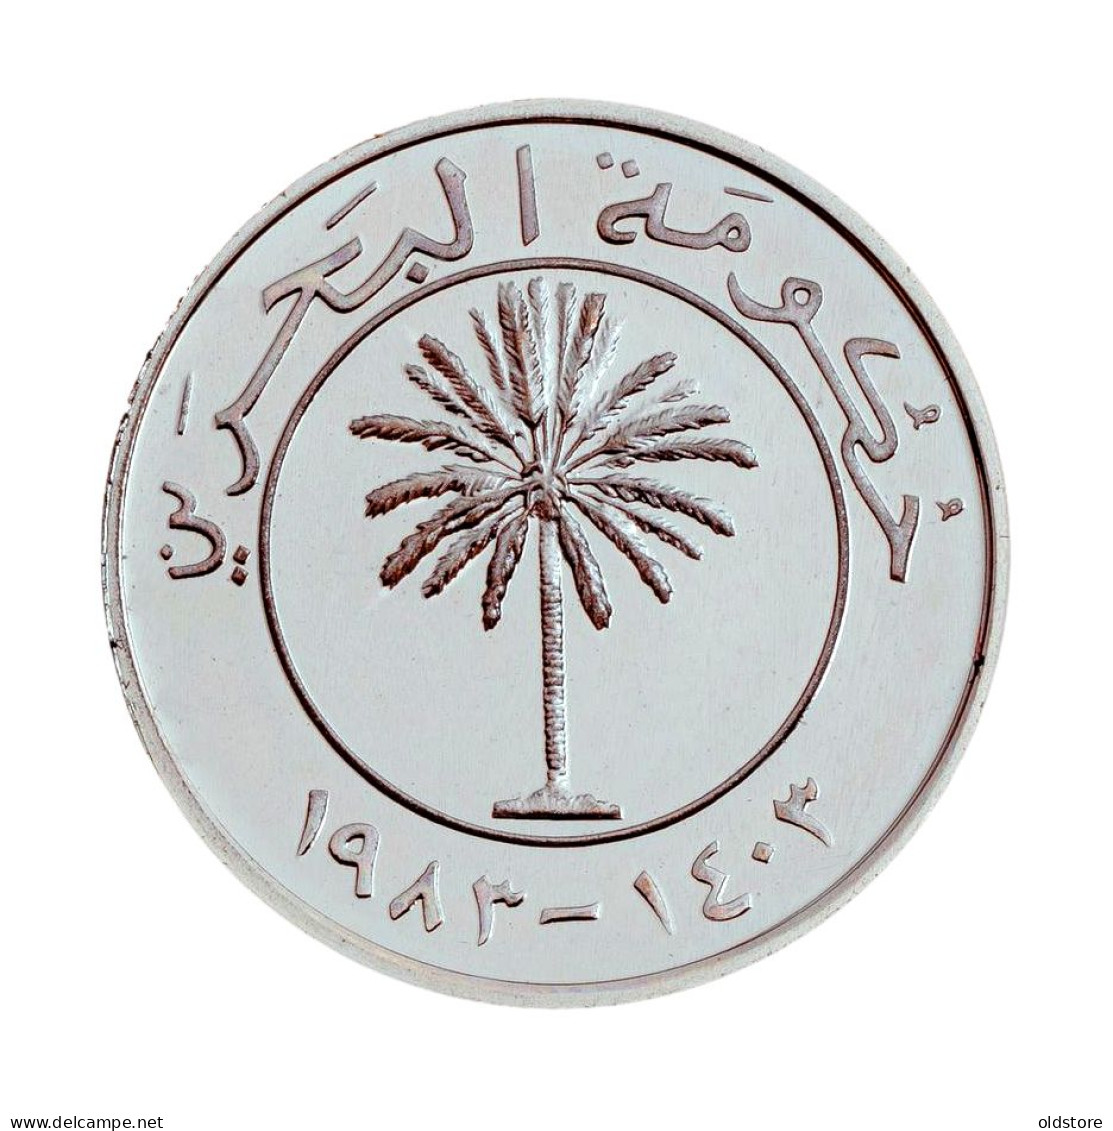 Bahrain Coins - MINT (1 Fils ) Proof  -  Sterling Silver - ND 1983 - Mint Silver Coins - Bahrain